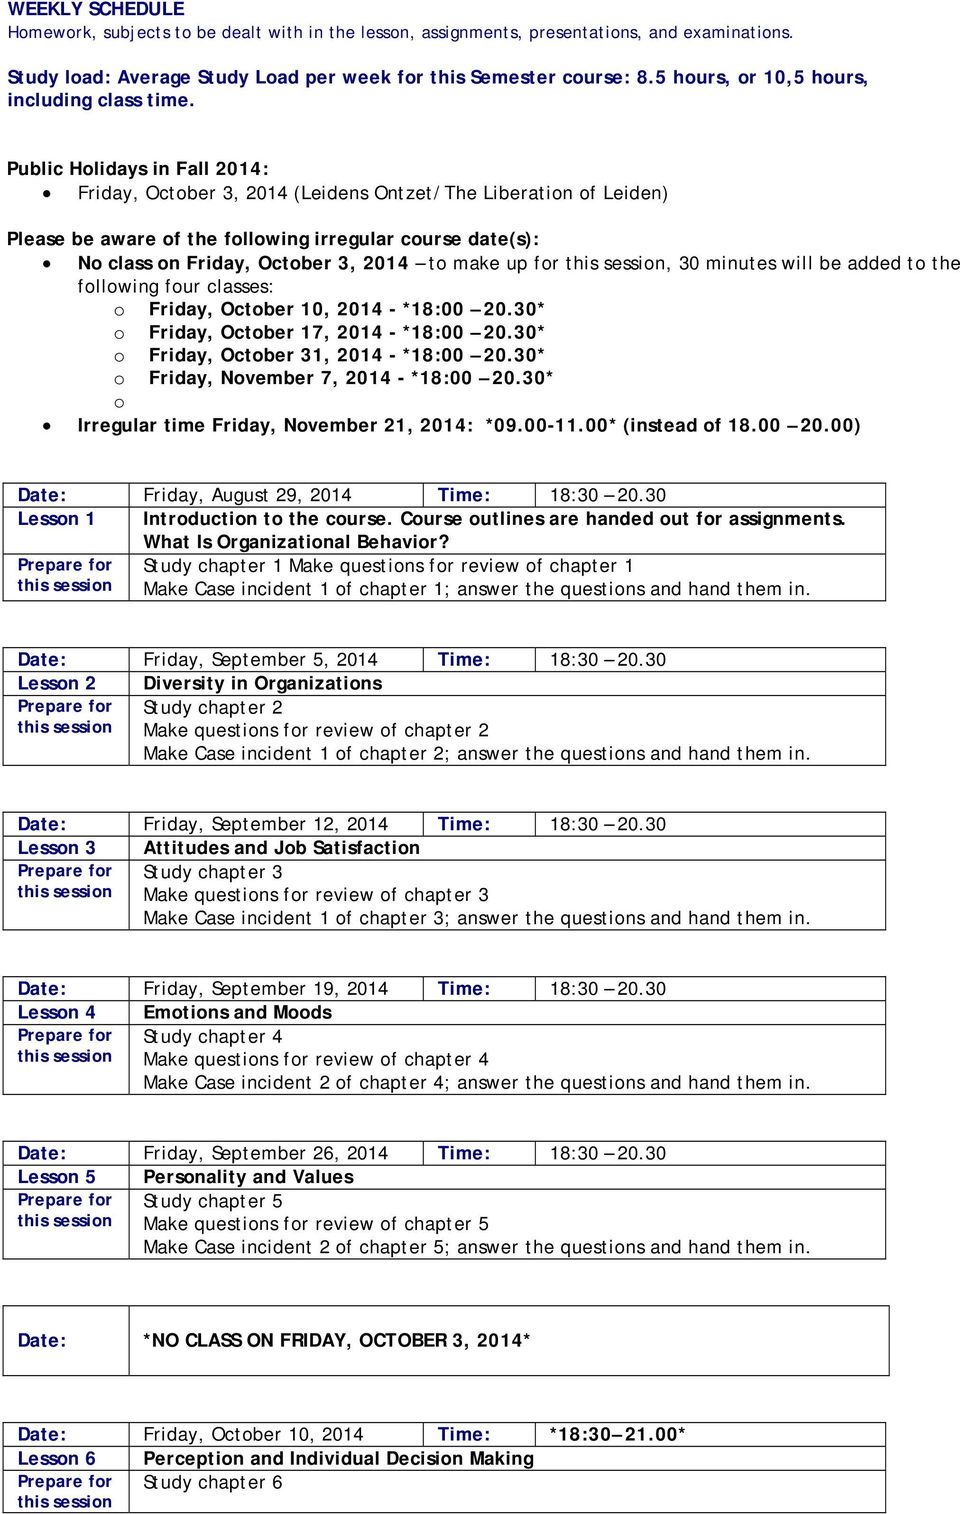 Public Holidays in Fall 2014: Friday, October 3, 2014 (Leidens Ontzet/The Liberation of Leiden) Please be aware of the following irregular course date(s): No class on Friday, October 3, 2014 to make